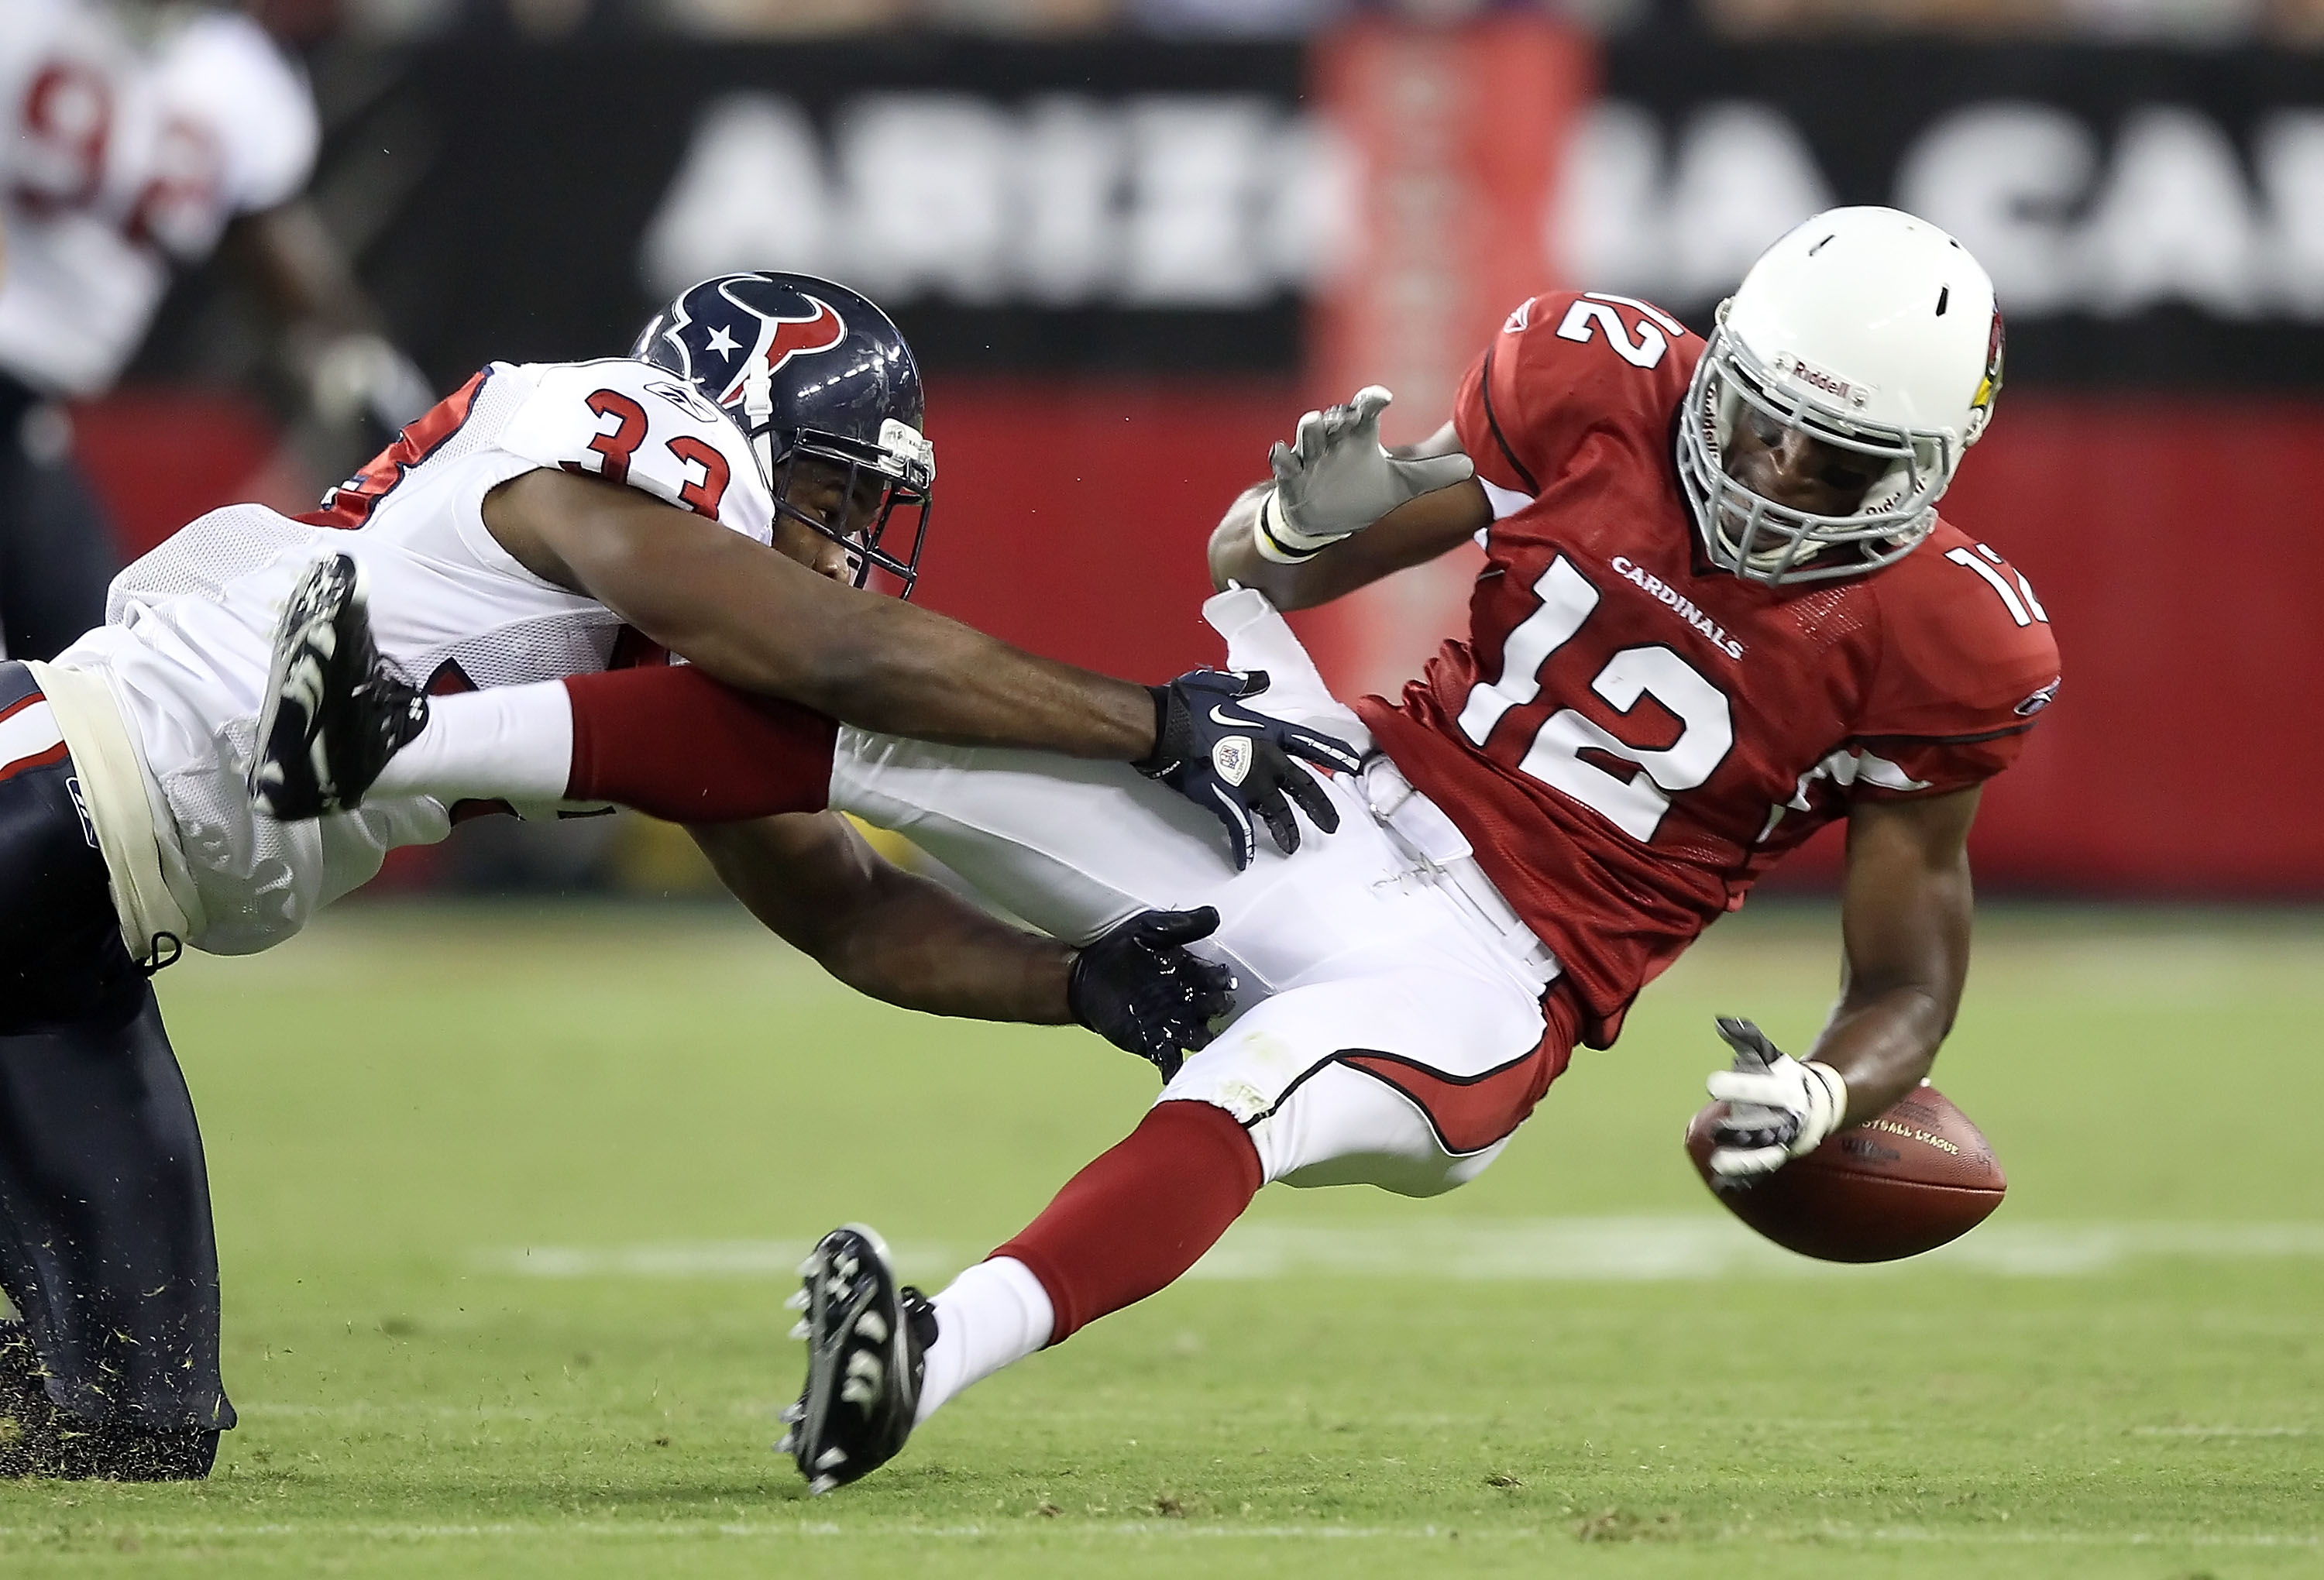 GLENDALE, AZ - AUGUST 14:  Wide receiver Andre Roberts #12 of the Arizona Cardinals loses the ball as he is hit by Troy Nolan #33 of the Houston Texans during preseason NFL game at the University of Phoenix Stadium on August 14, 2010 in Glendale, Arizona.